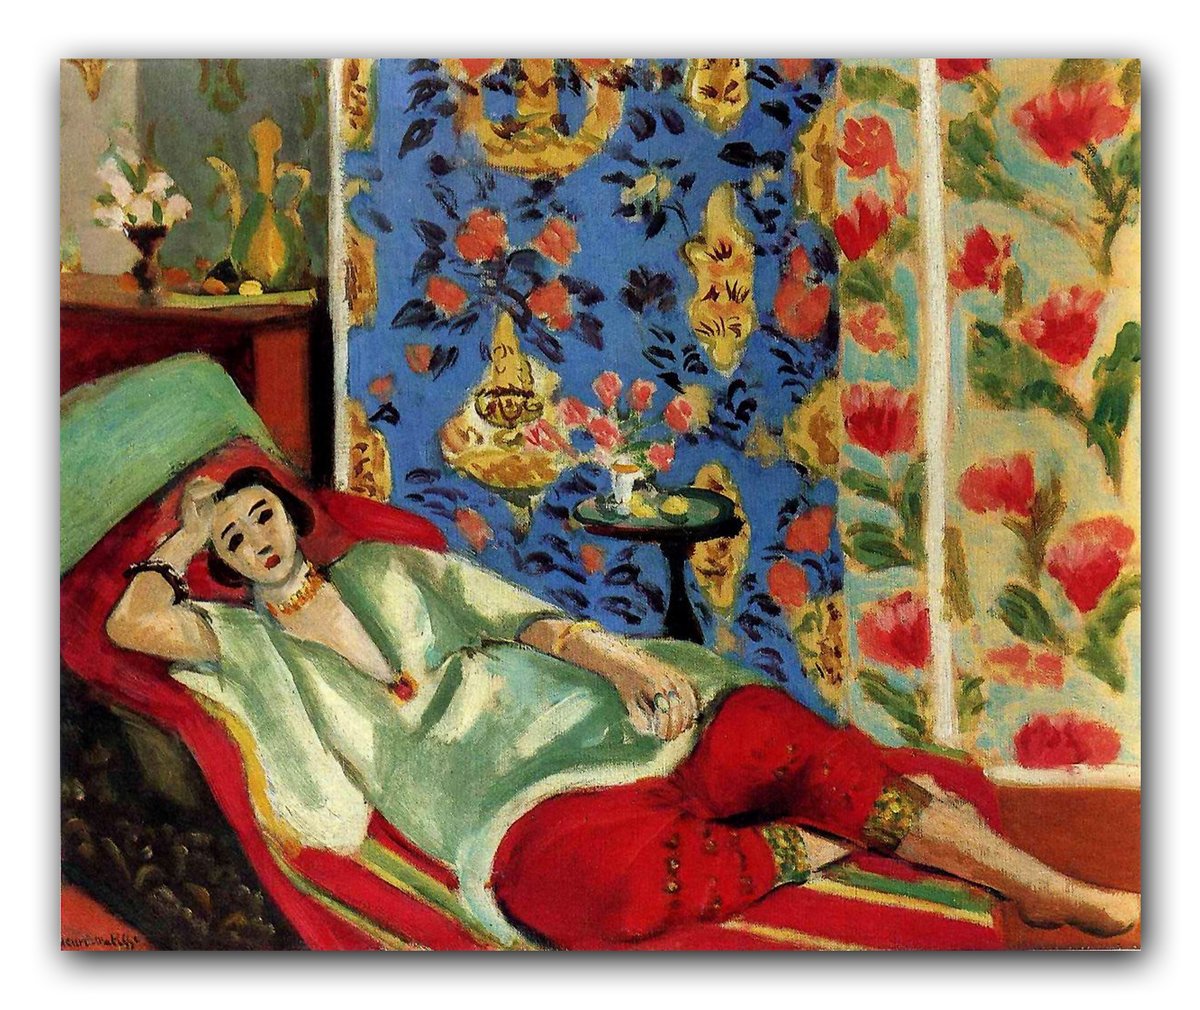 Art Inspiration For today: Odalisque with Red Trousers by Henri Matisse, oil on canvas, genre: Post Impressionism, 1924-1925 #odalisquewithredtrousers #henrimatisse #artinspiration #oilpainting #postimpressionism #figurativeart #artonfacebook #tarahuttongallery #pohoartist